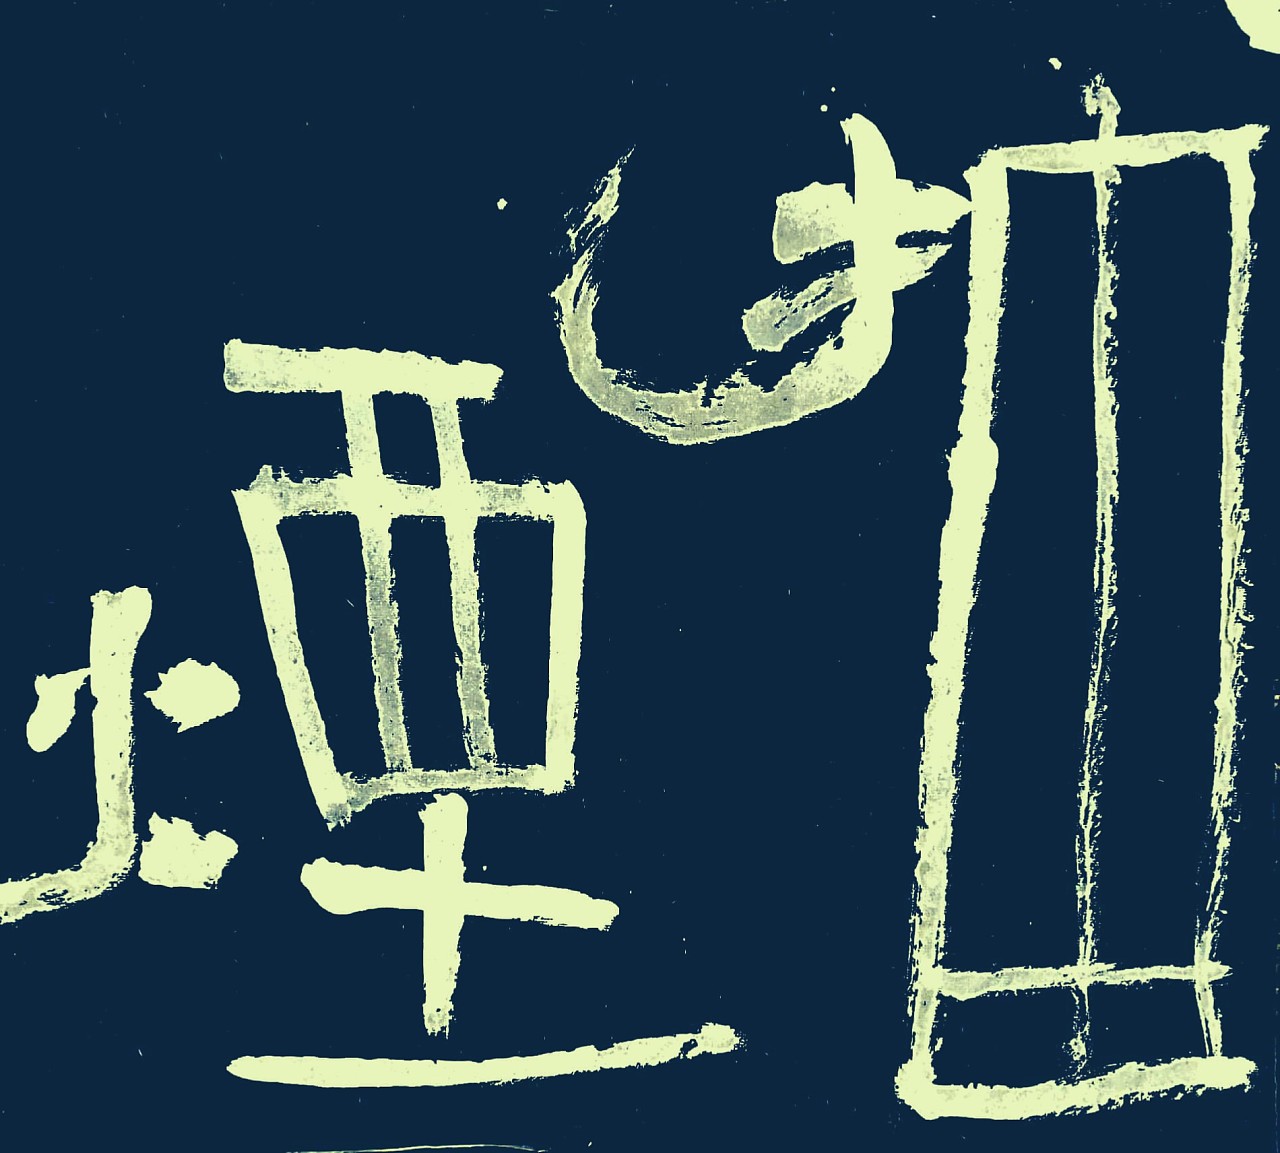 Chinese Creative Font DesignFrom general symmetrical constitution to complex repeated constitution